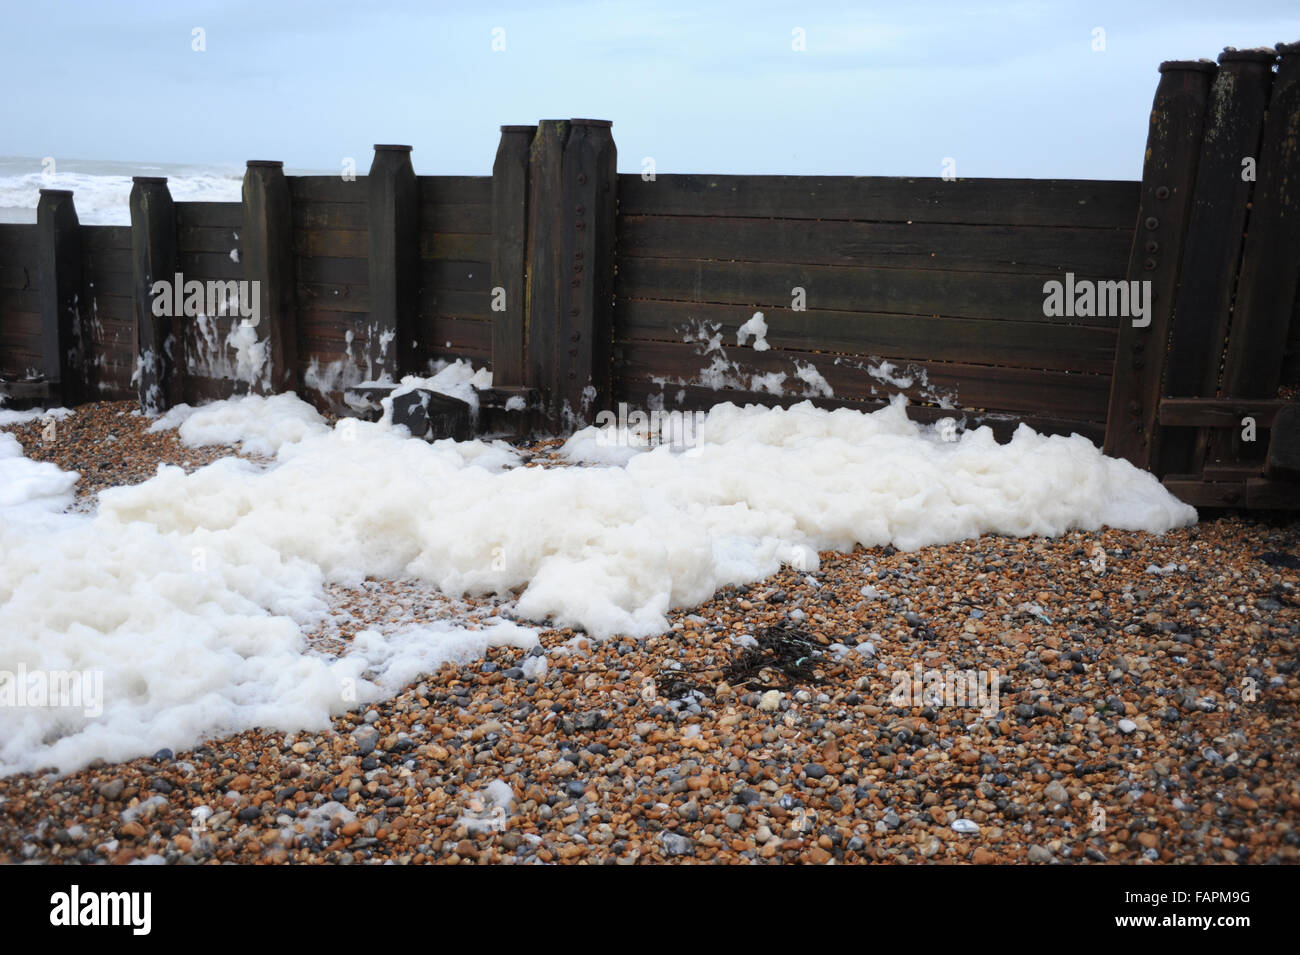 During bad weather and stormy conditions large waves cause foam to appear on the beach in front of Eastbourne Pier in the seaside town of Eastbourne, East Sussex, England. Stock Photo